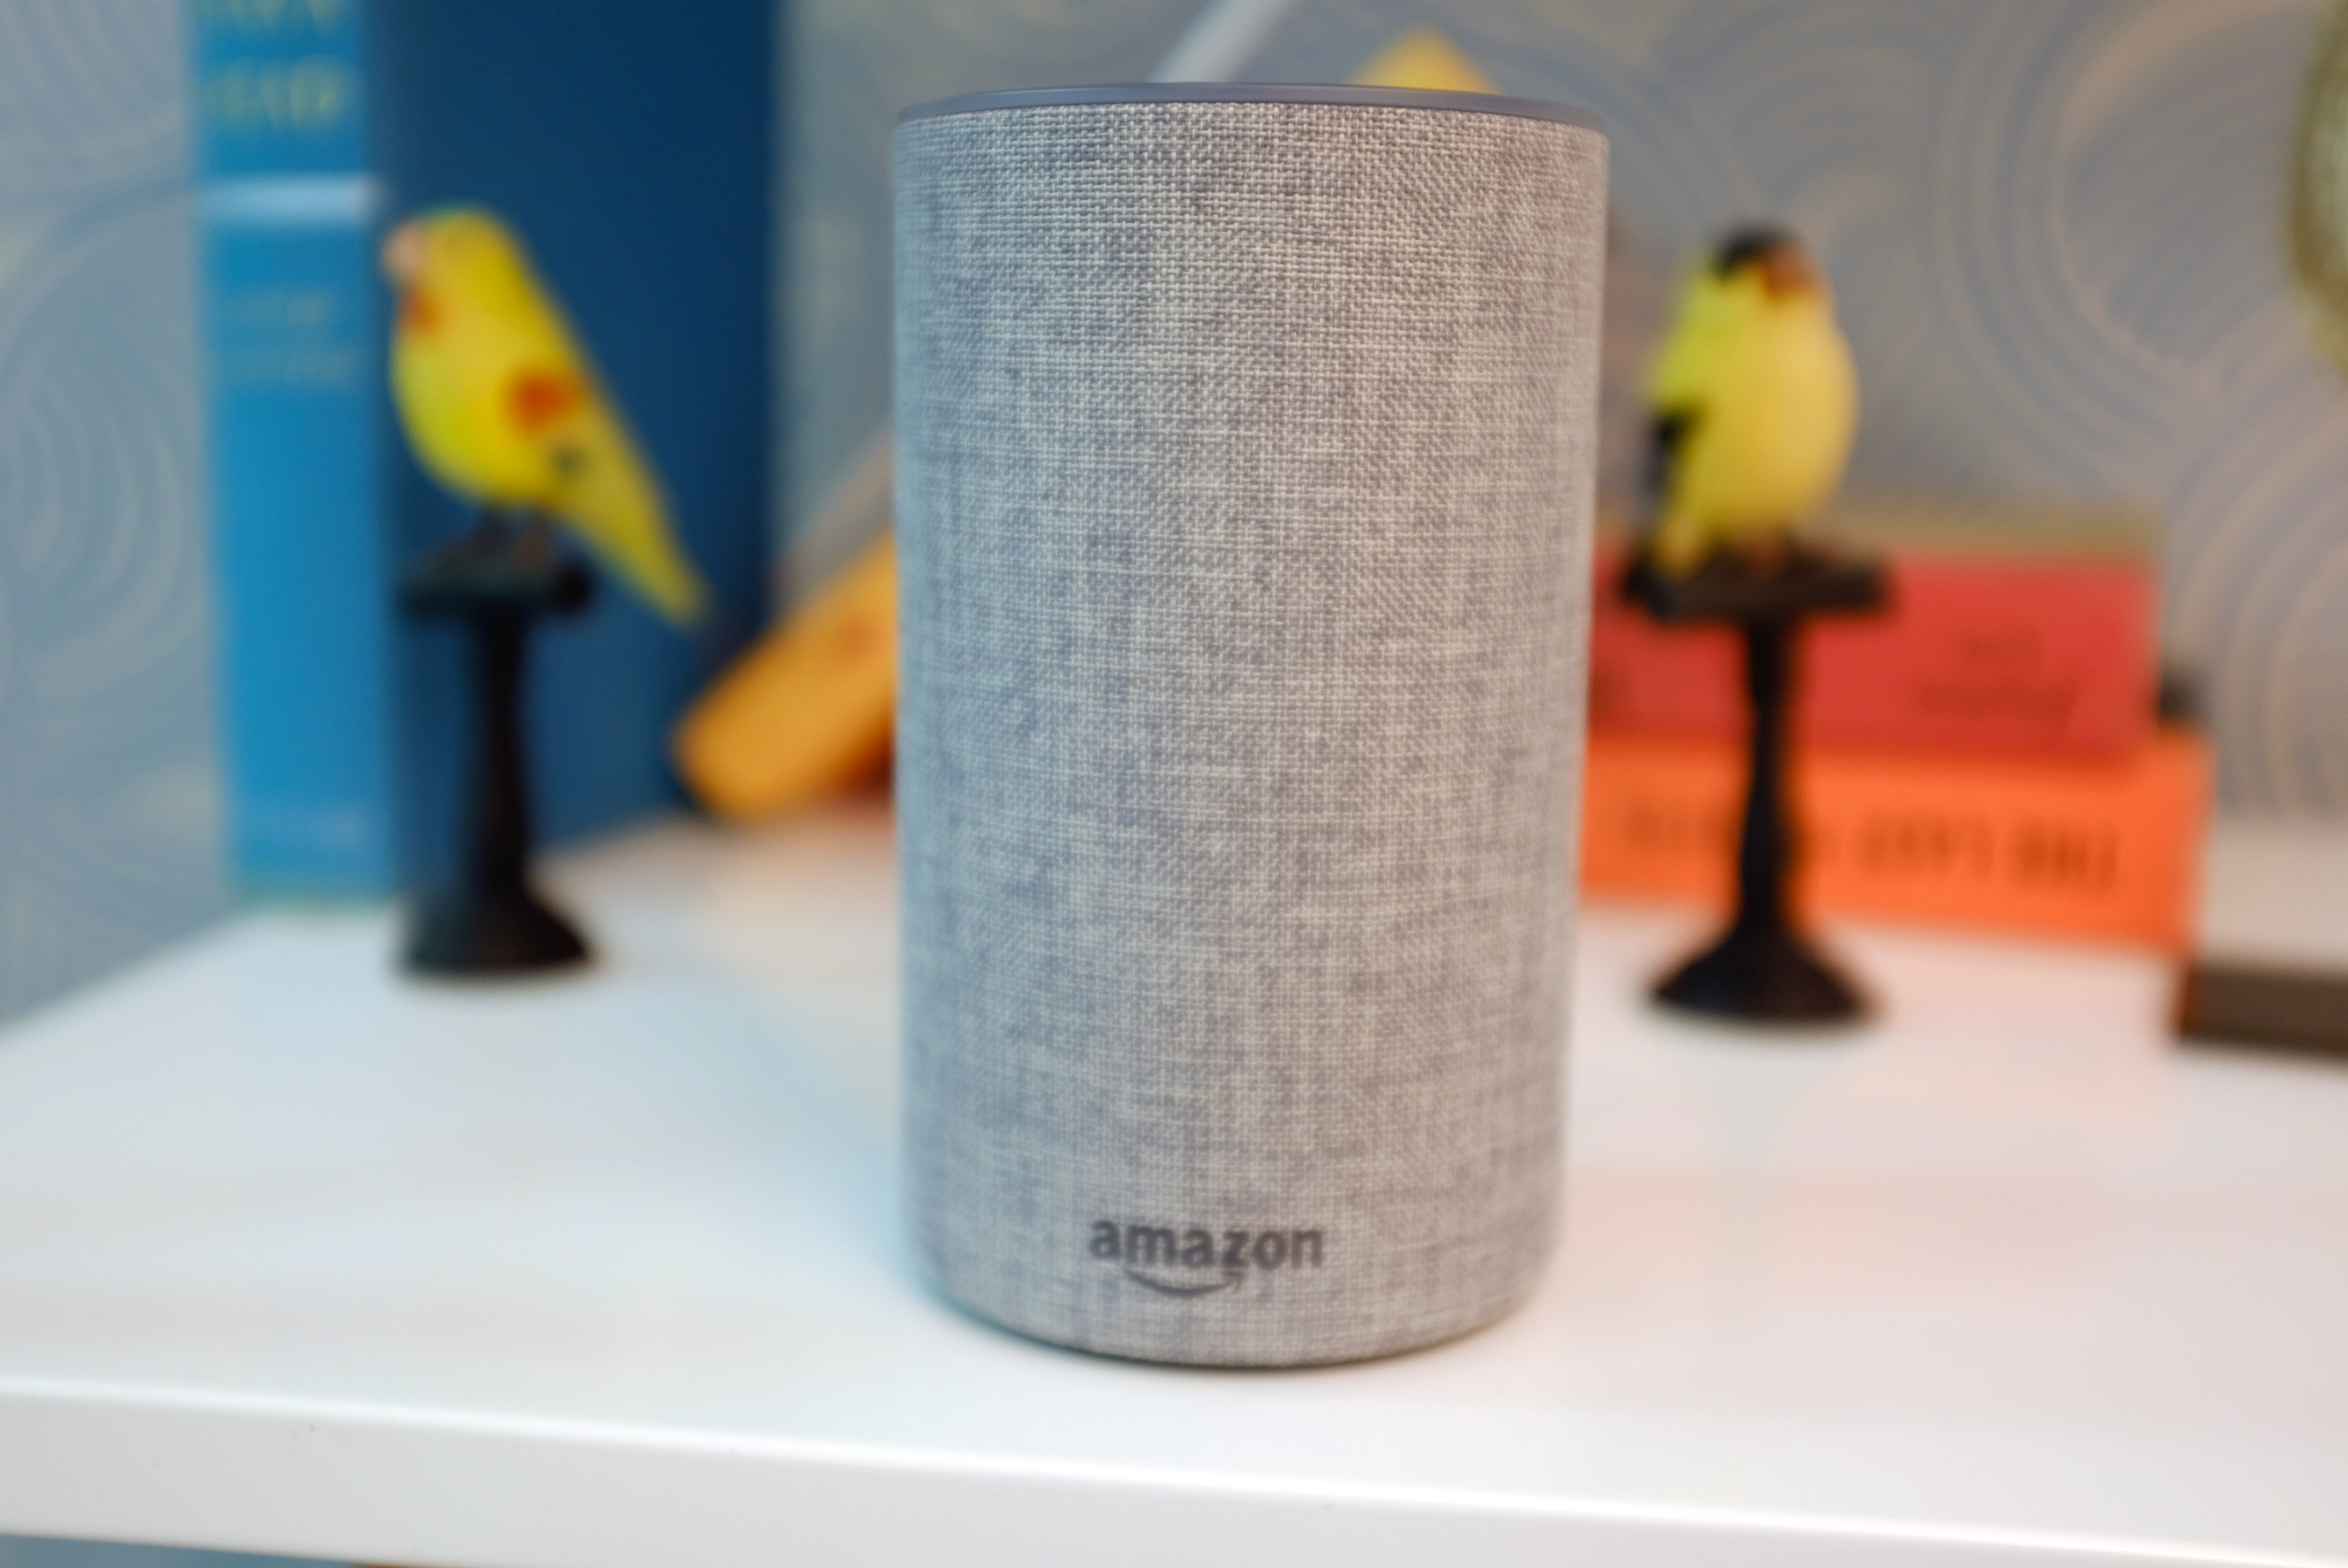 Amazon adds in-skill purchases to Alexa